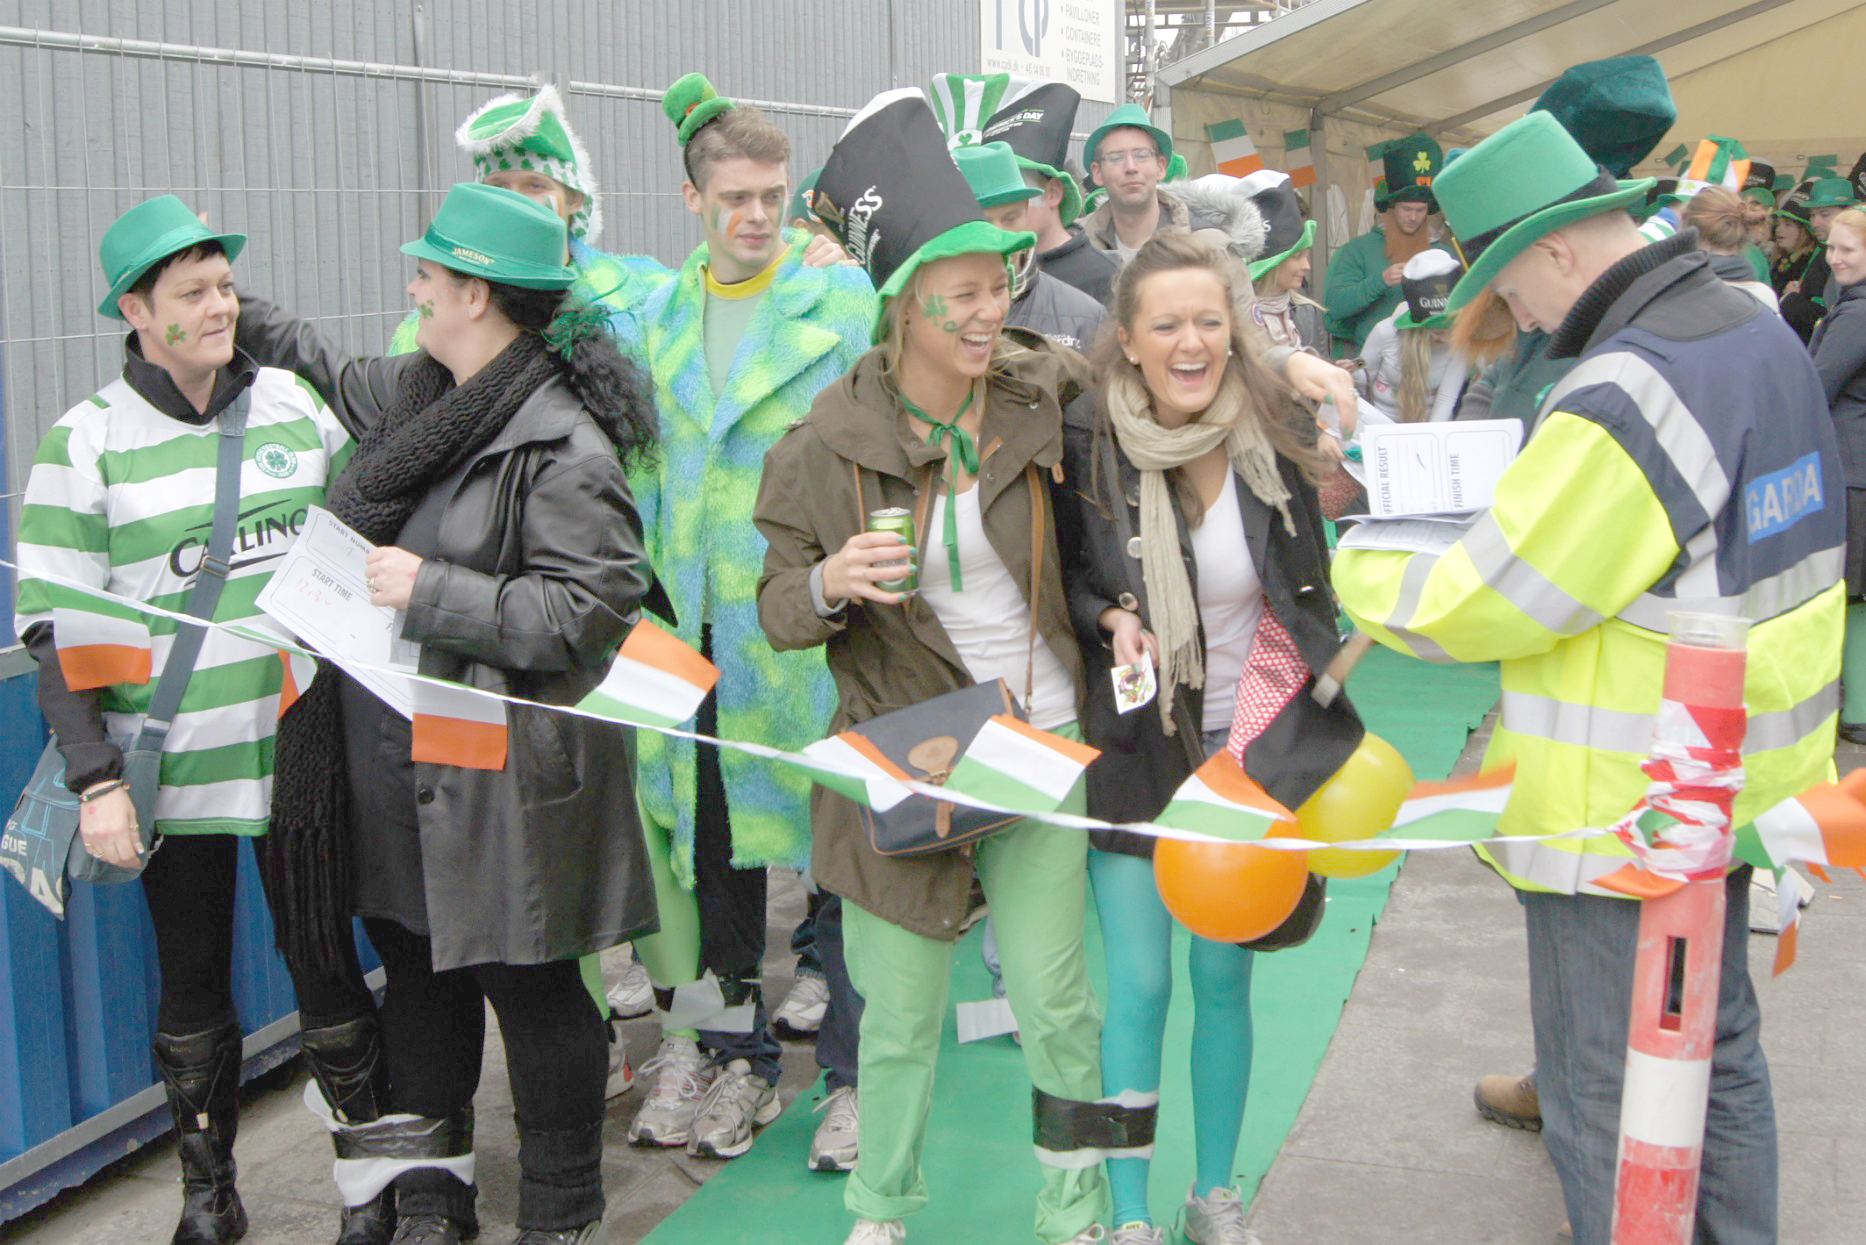 March 1 registration for St Patrick’s Day triple jump: participation limited to 100 couples